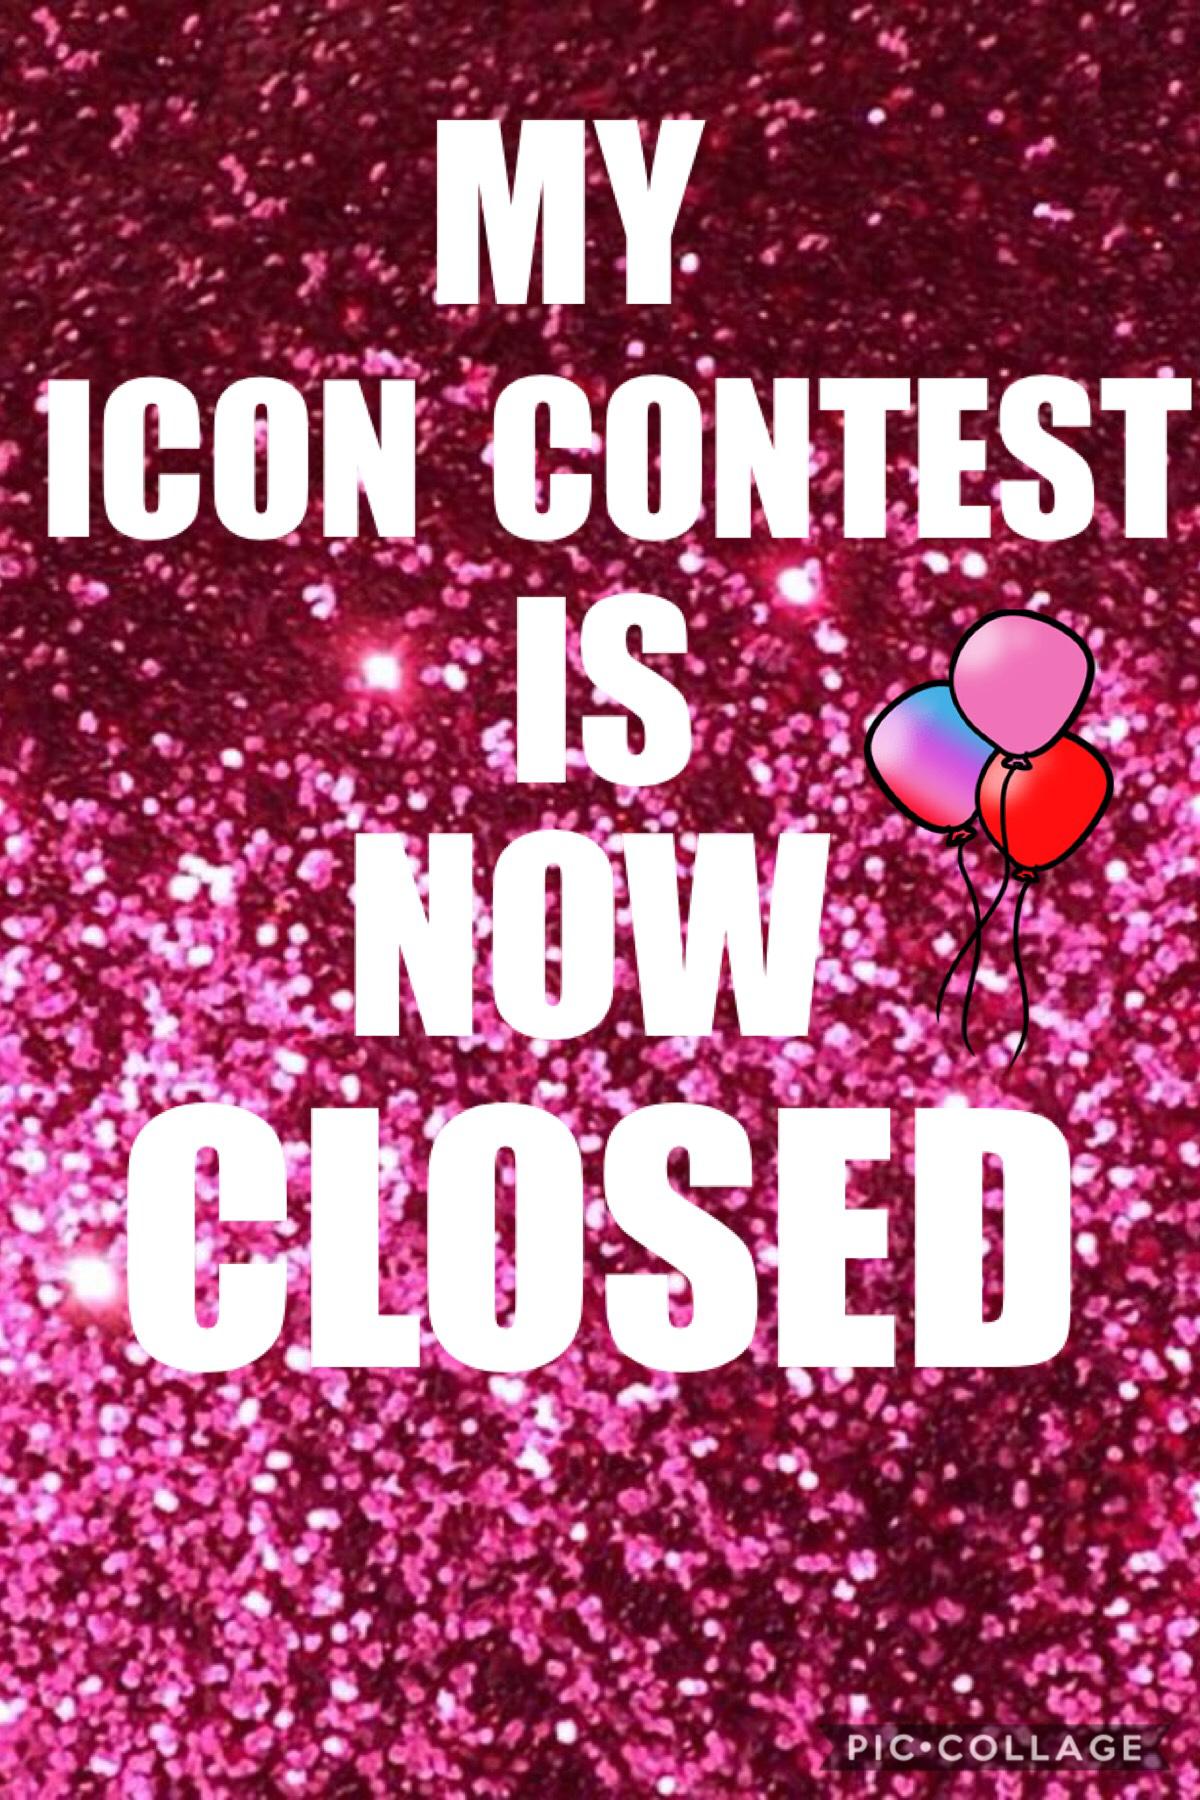 My icon contest is closed